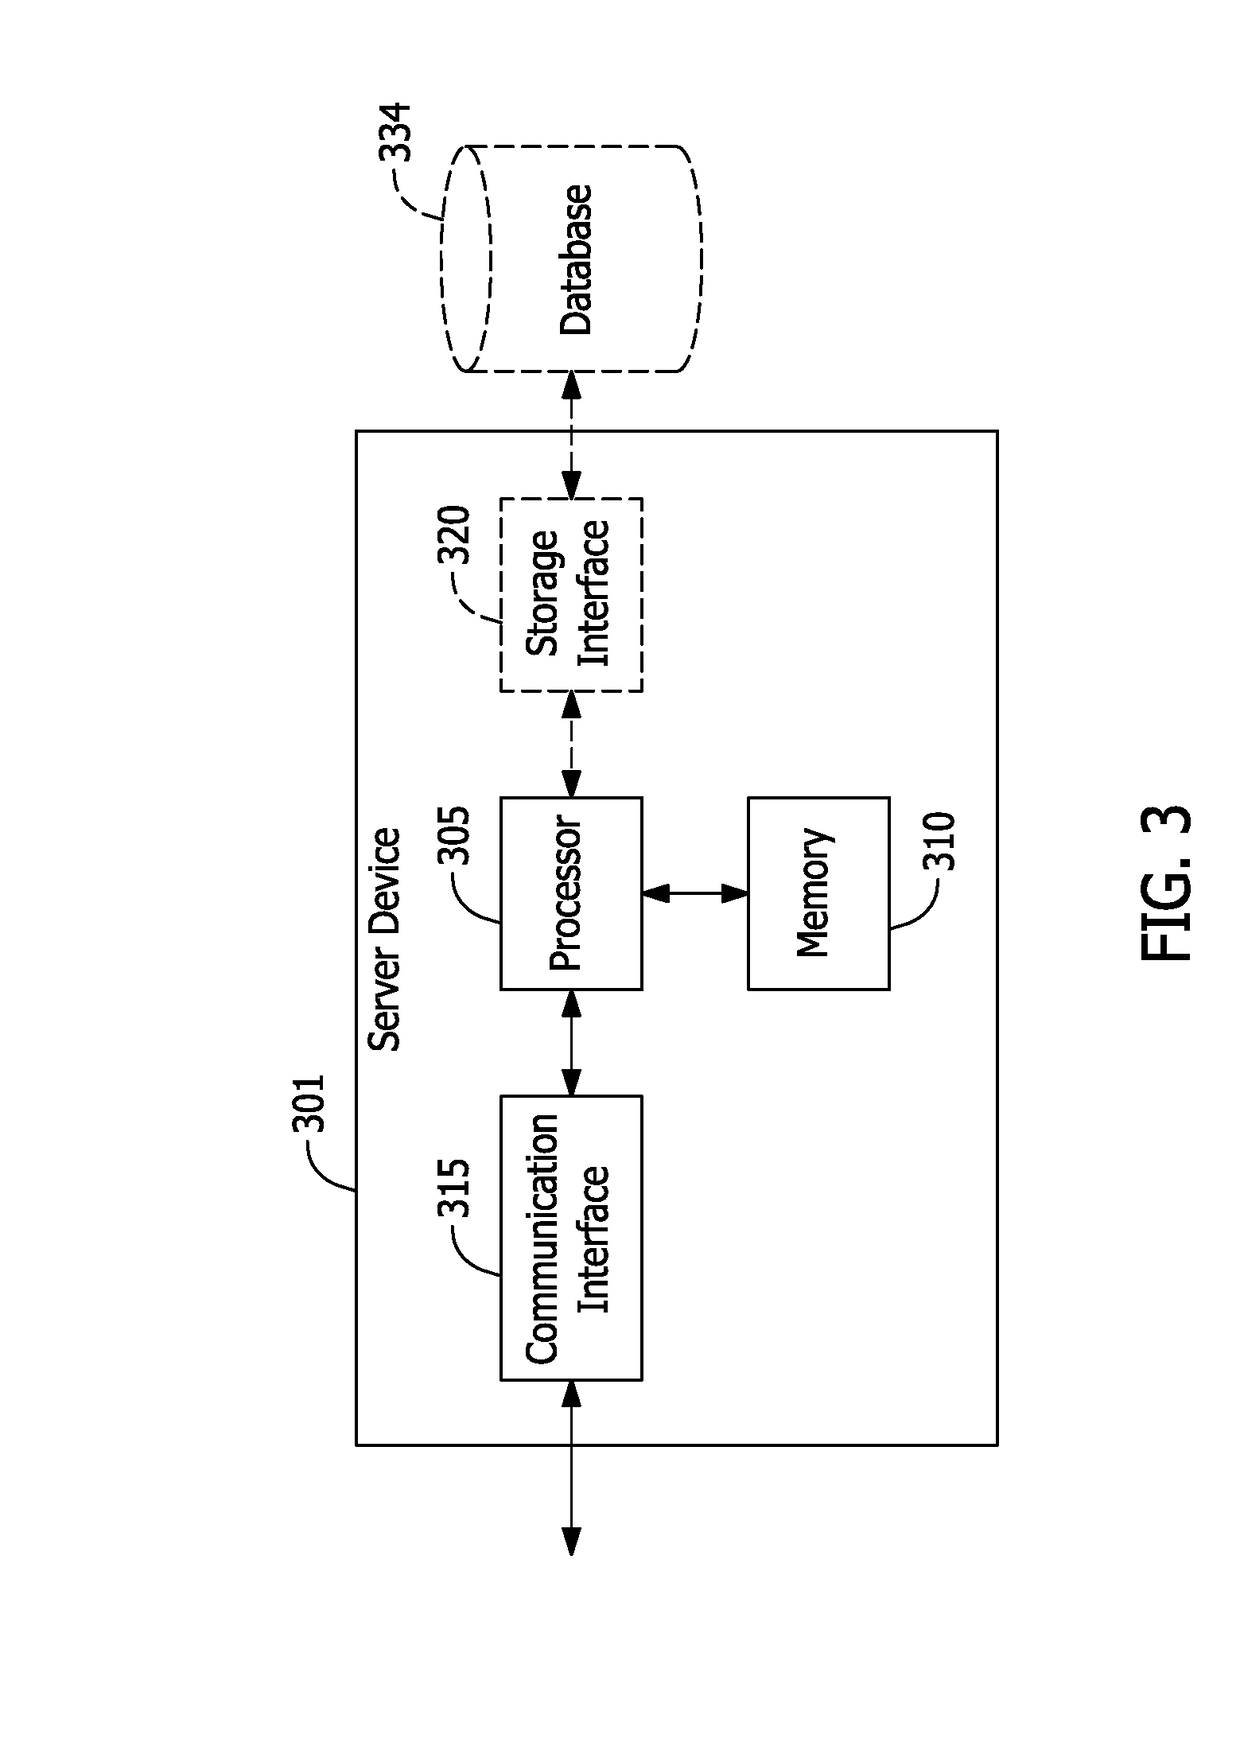 Systems and methods for two-factor location-based device verification